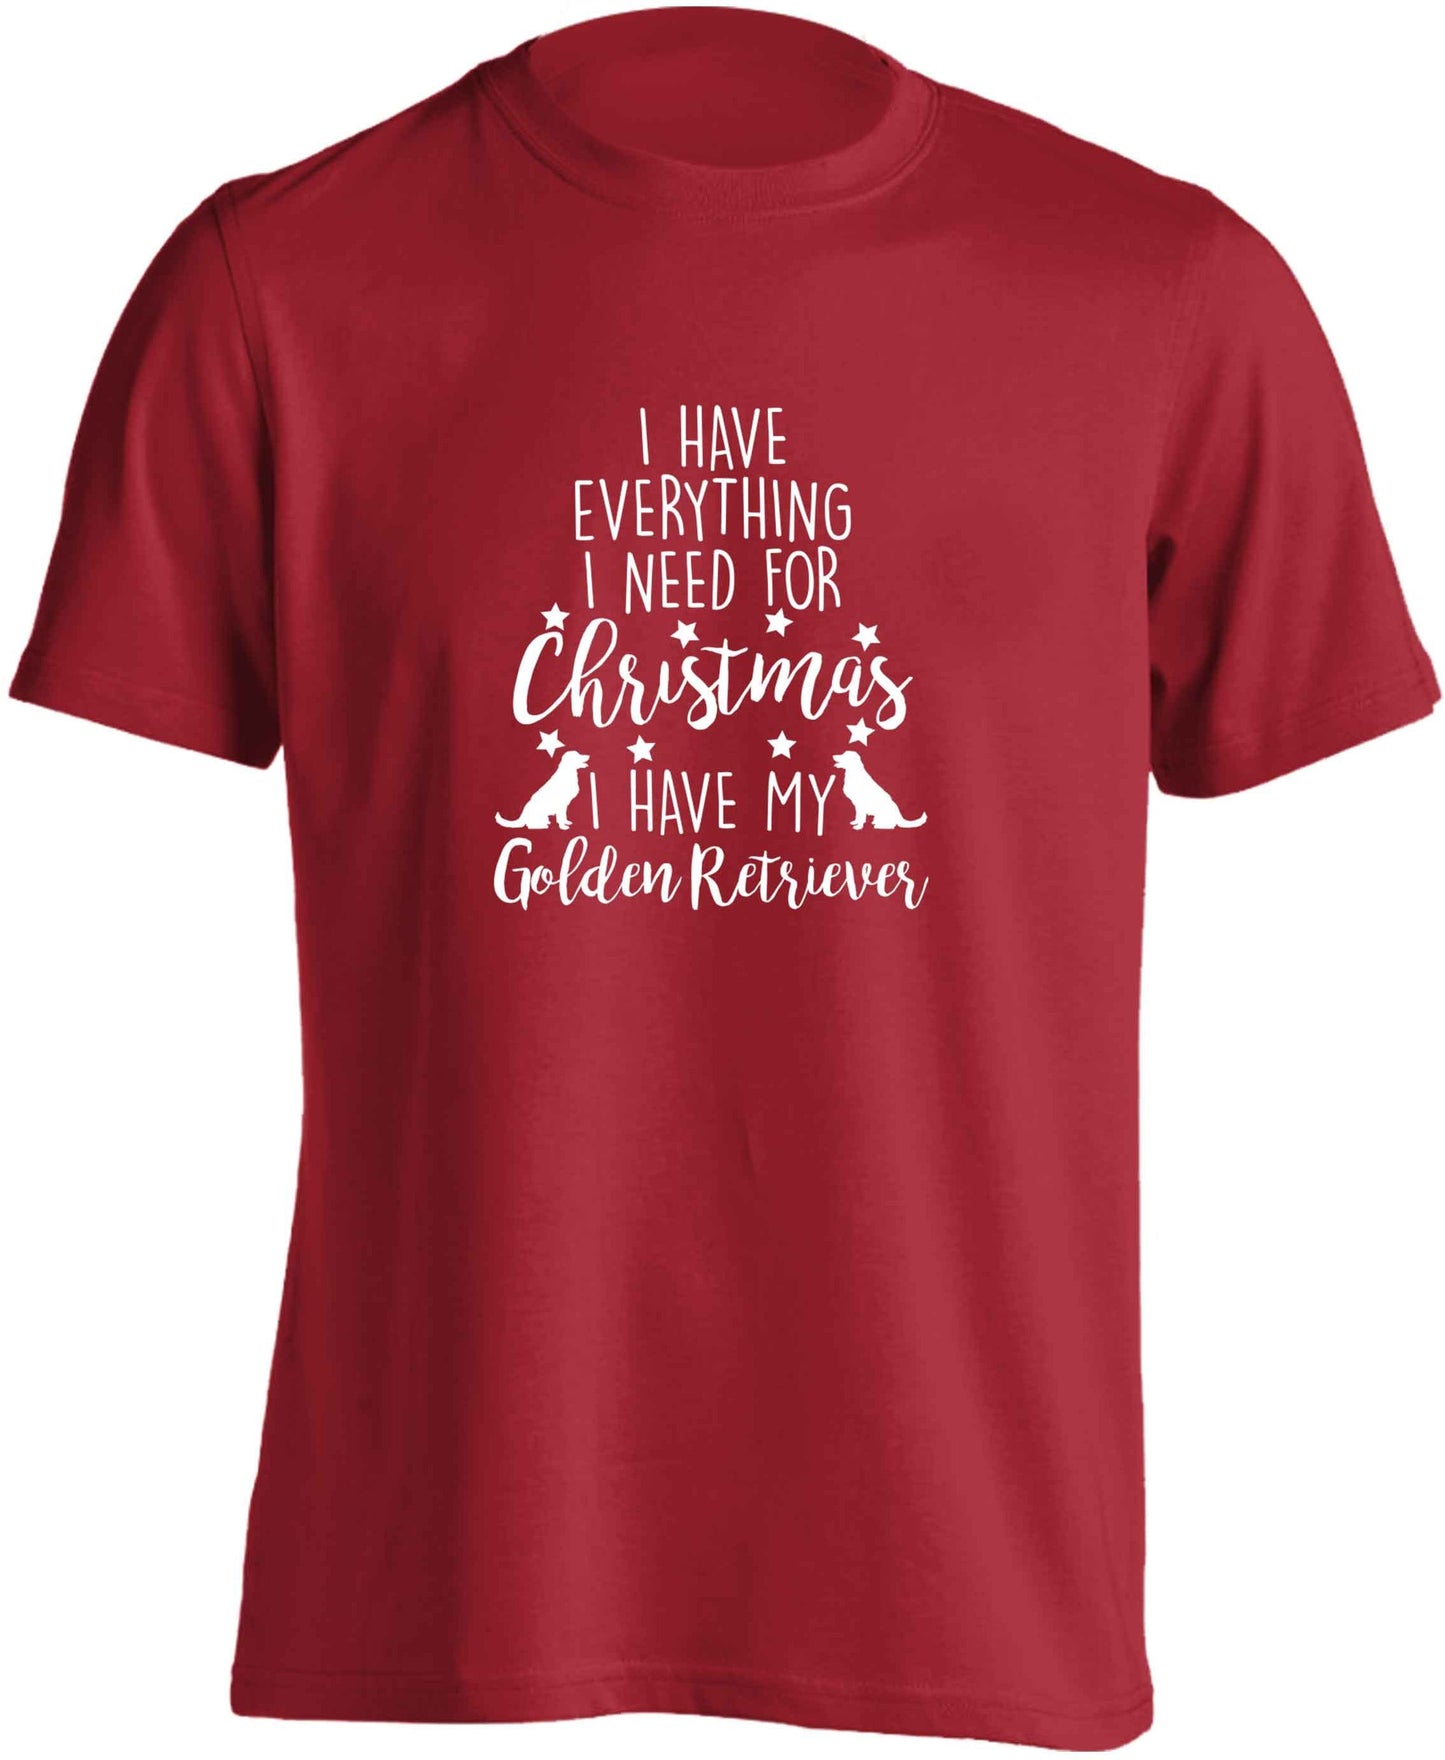 I have everything I need for Christmas I have my golden retriever adults unisex red Tshirt 2XL